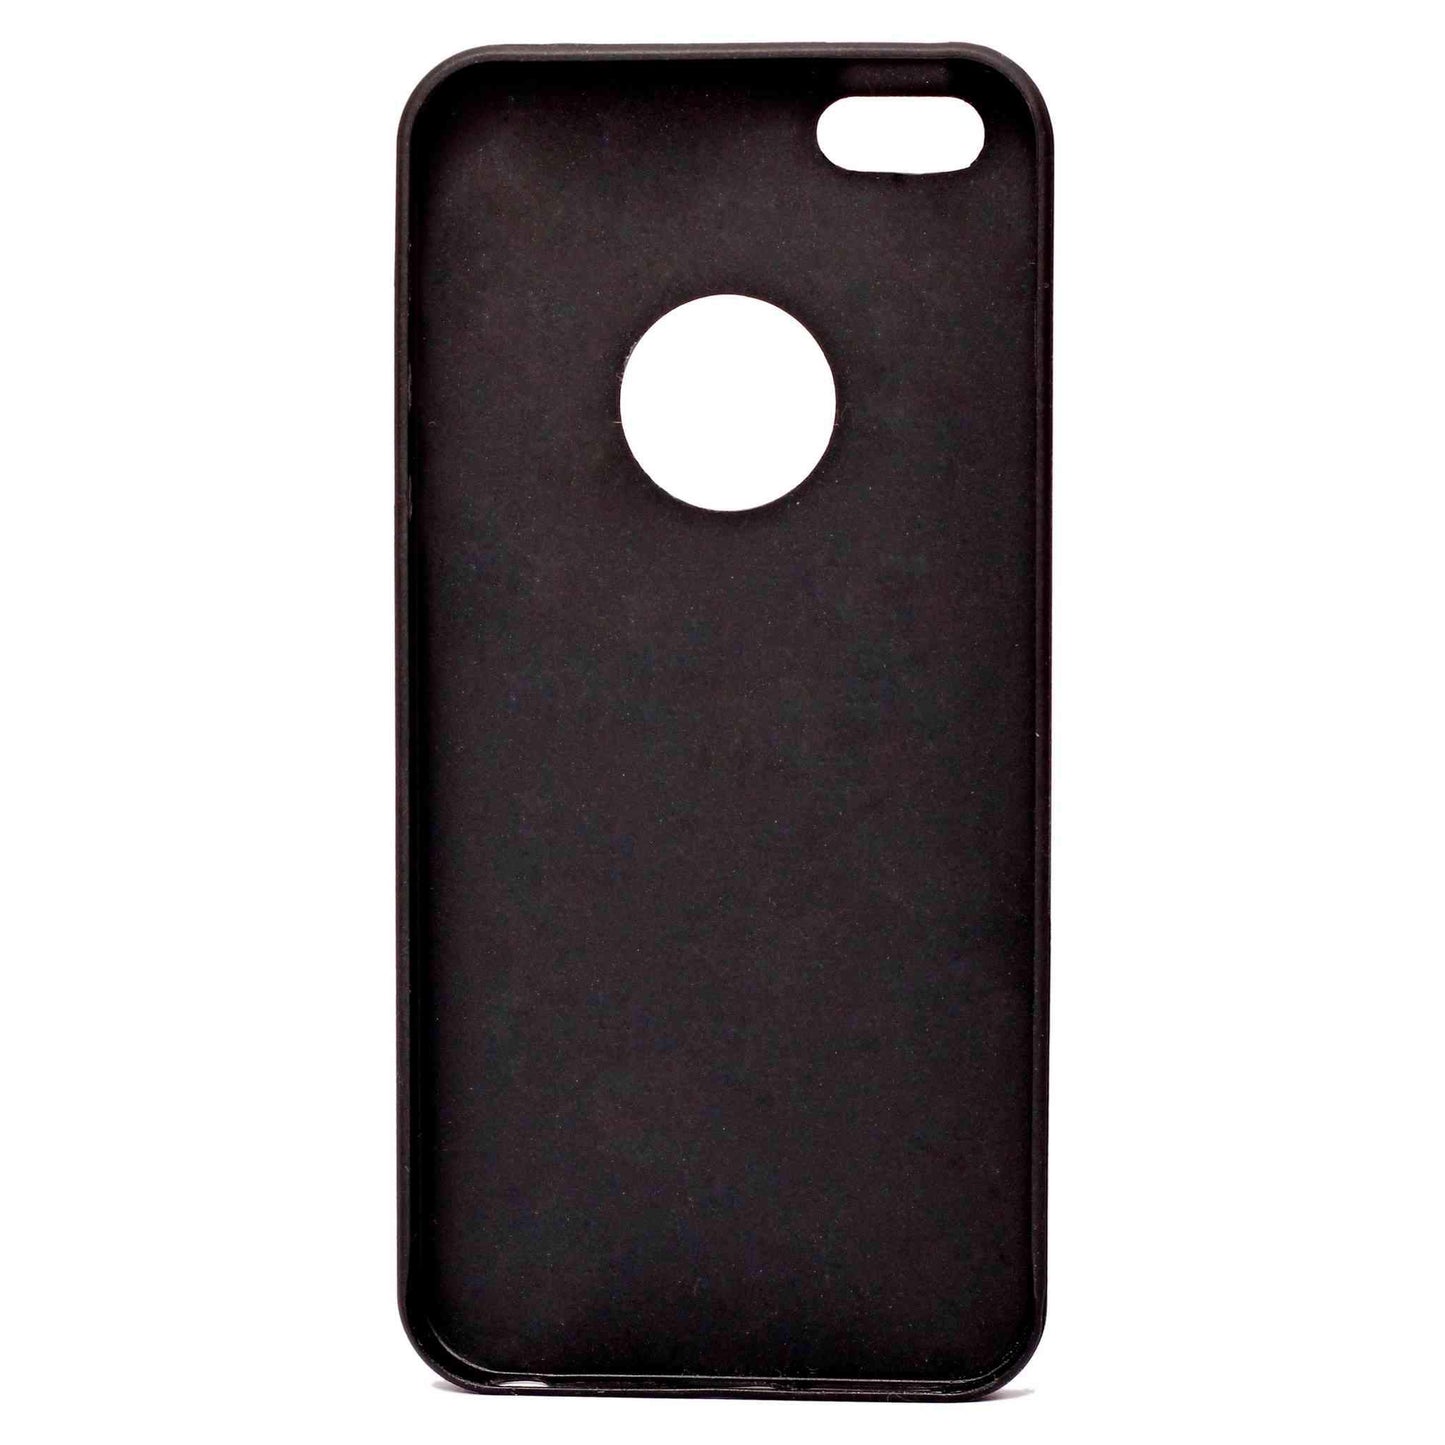 Indian Petals Polycarbonate 3D Pattern Protective Mobile Back Case Cover for Apple iPhone 5, Black - Indian Petals